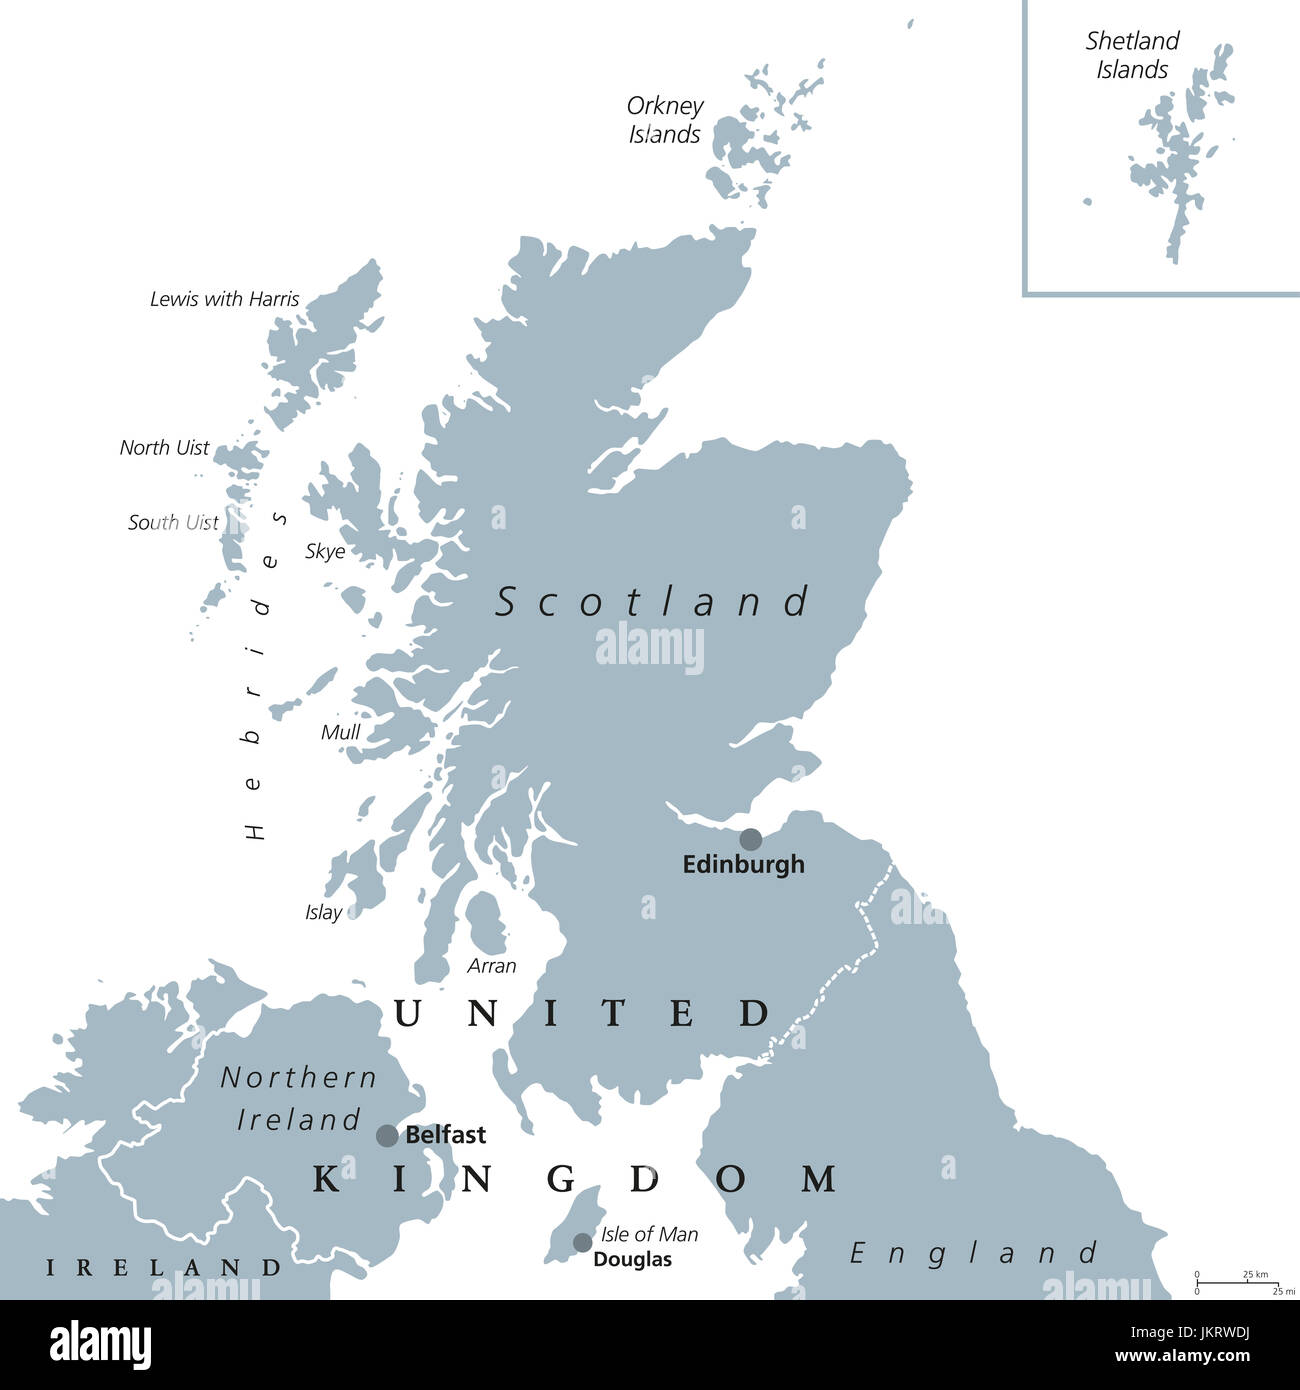 Scotland political map with capital Edinburgh. Country and part of the United Kingdom. Covers the northern third of the island of Great Britain. Stock Photo